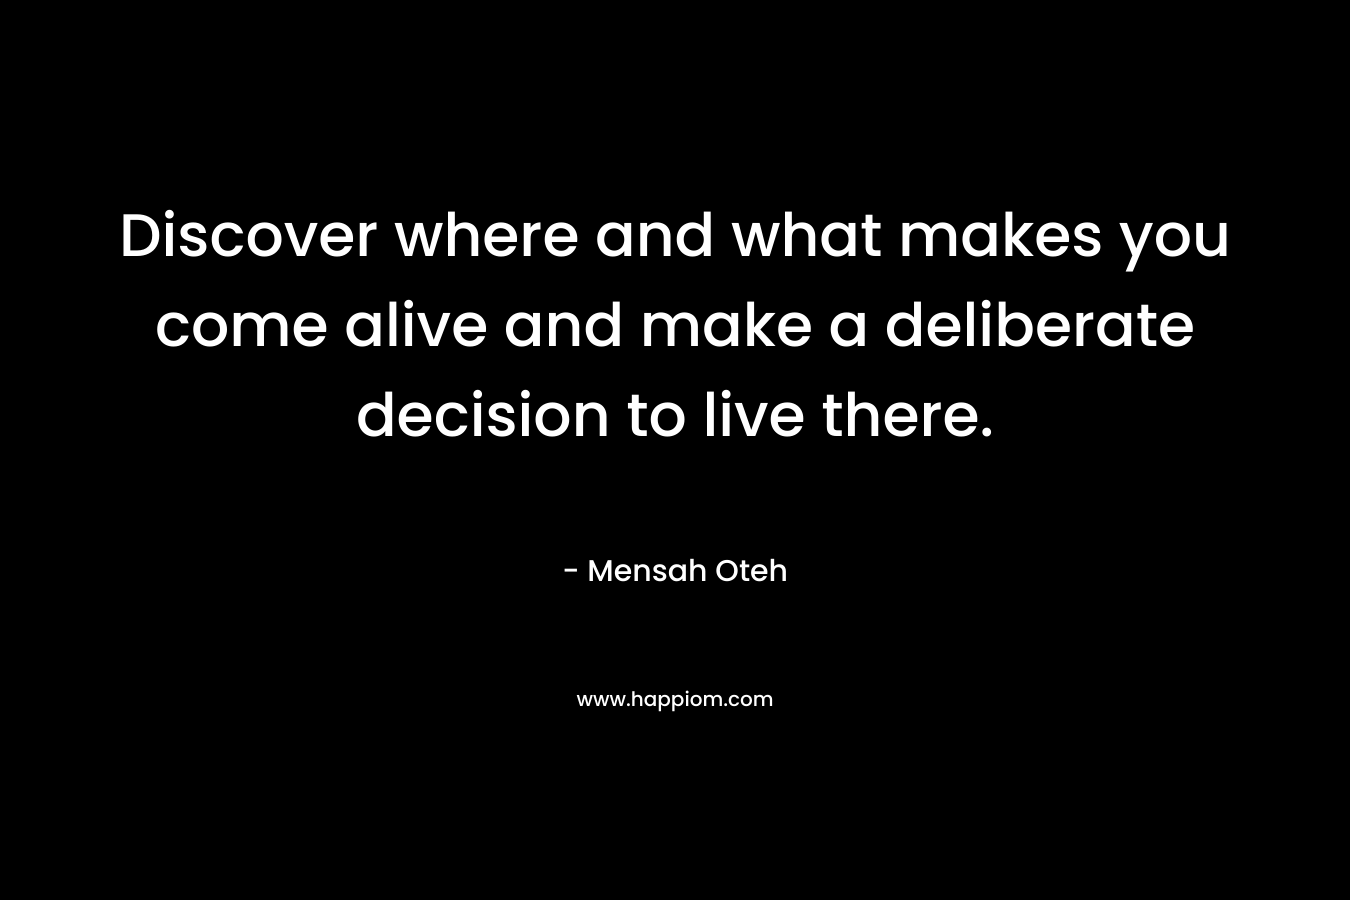 Discover where and what makes you come alive and make a deliberate decision to live there.